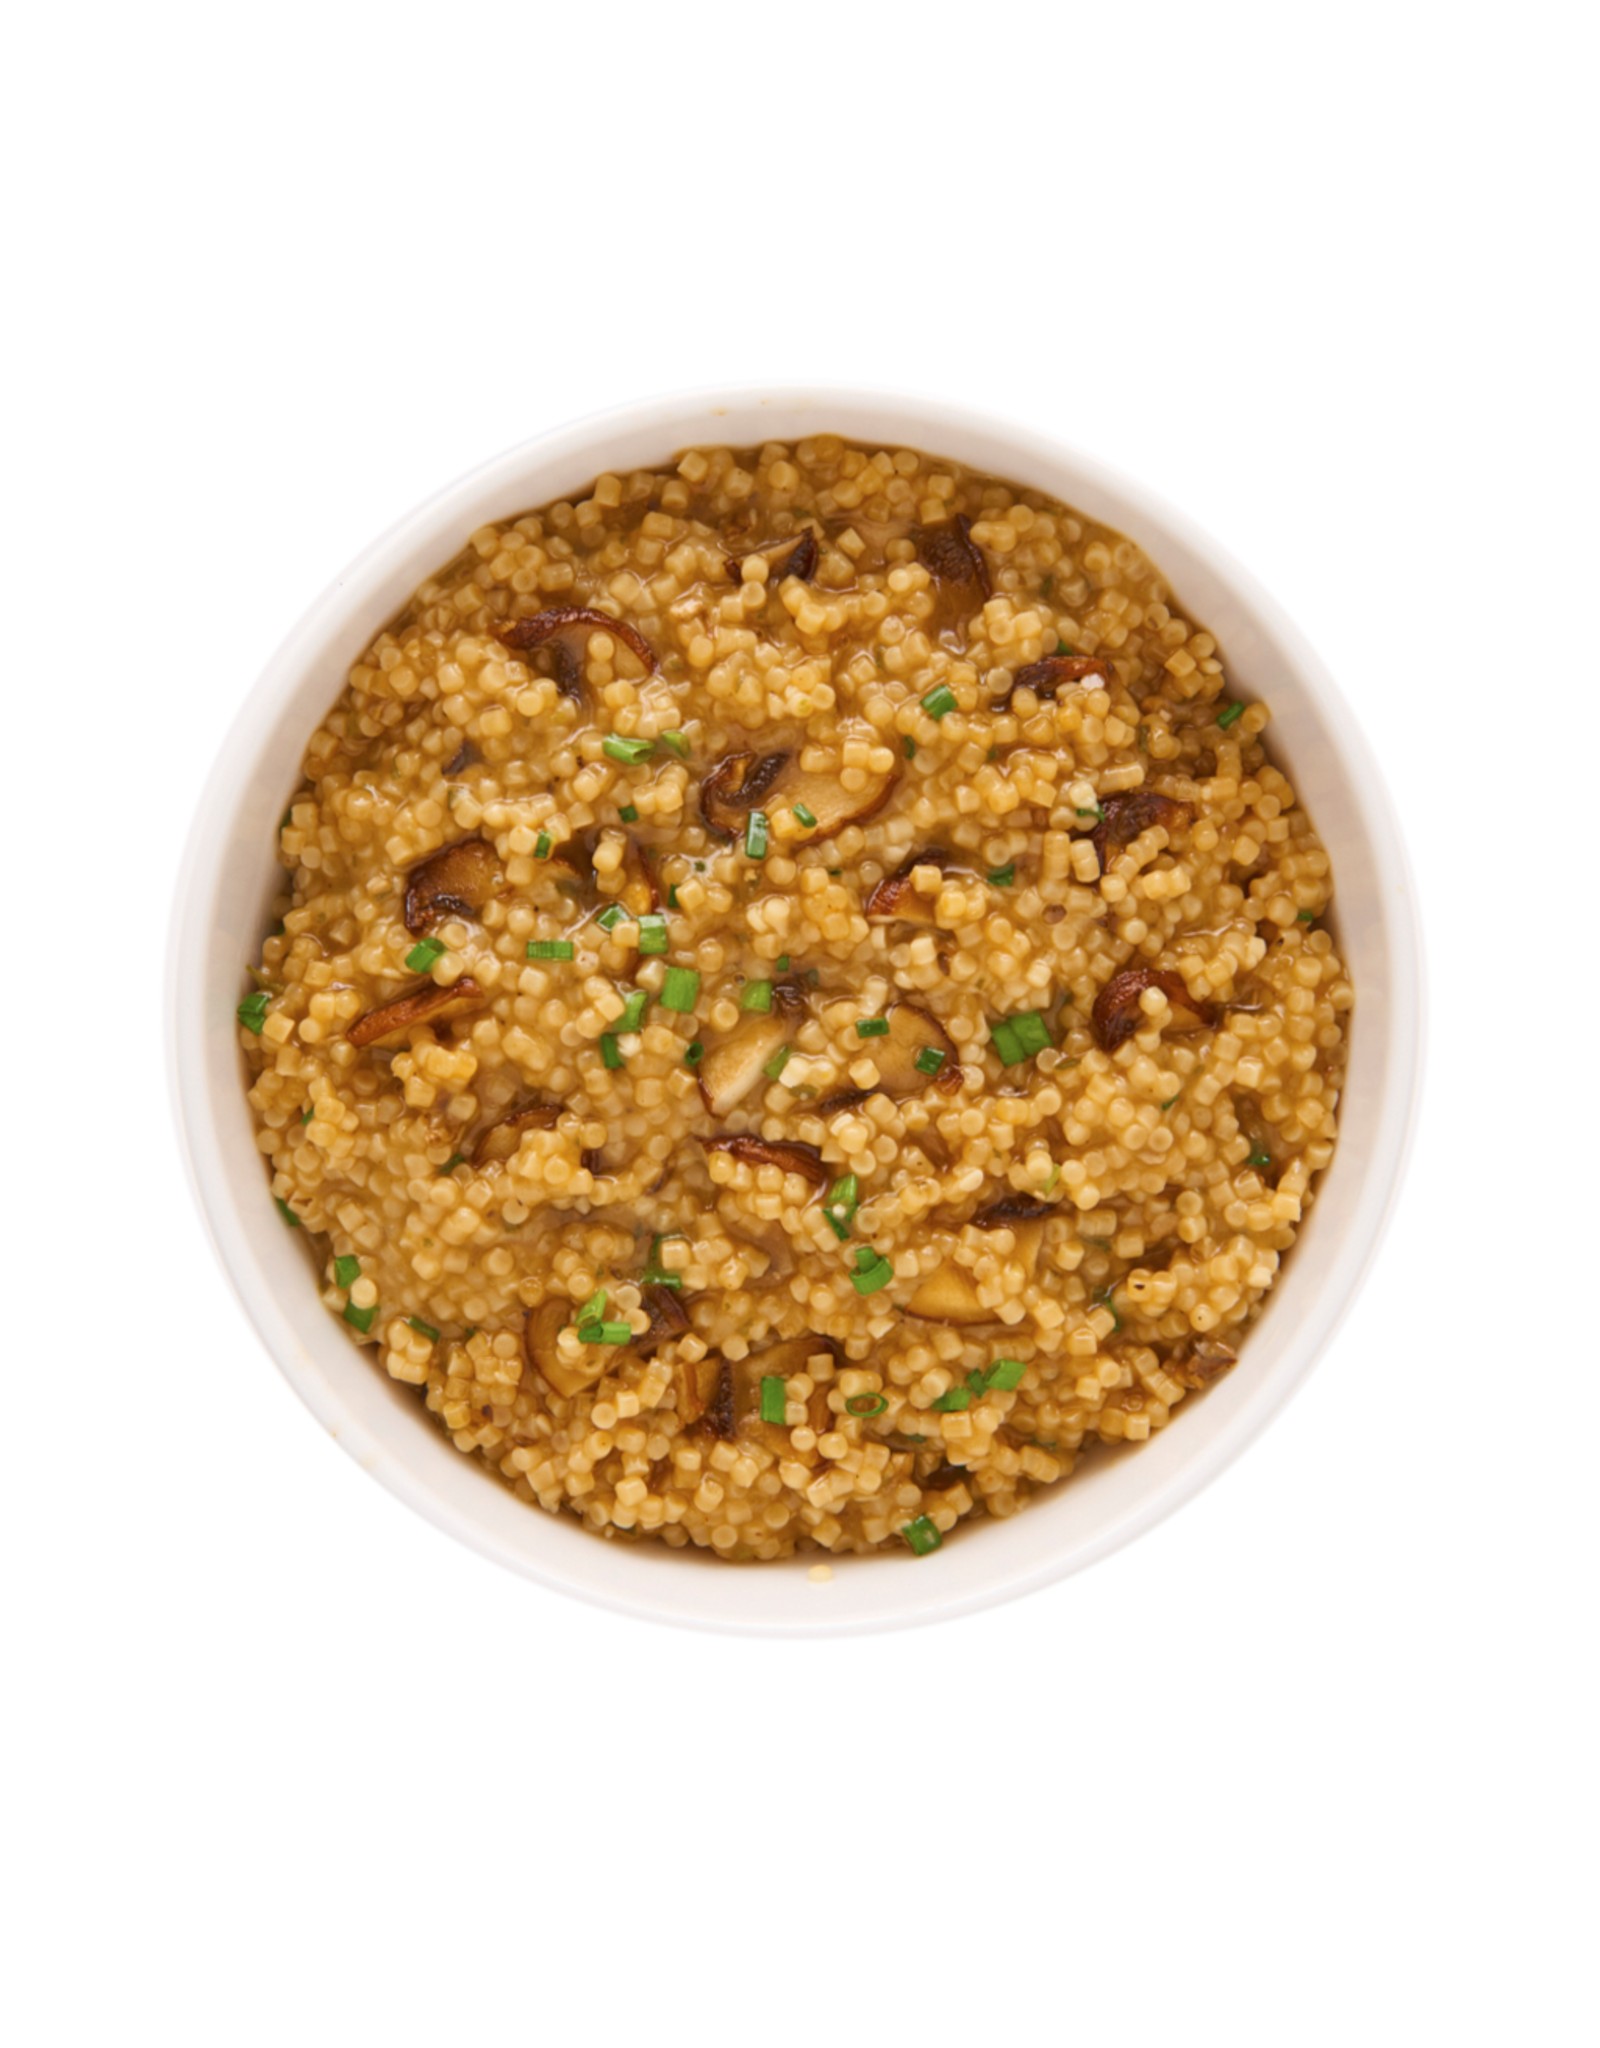 Ideal Protein Creamy Mushroom & Parmesan Couscous Risotto